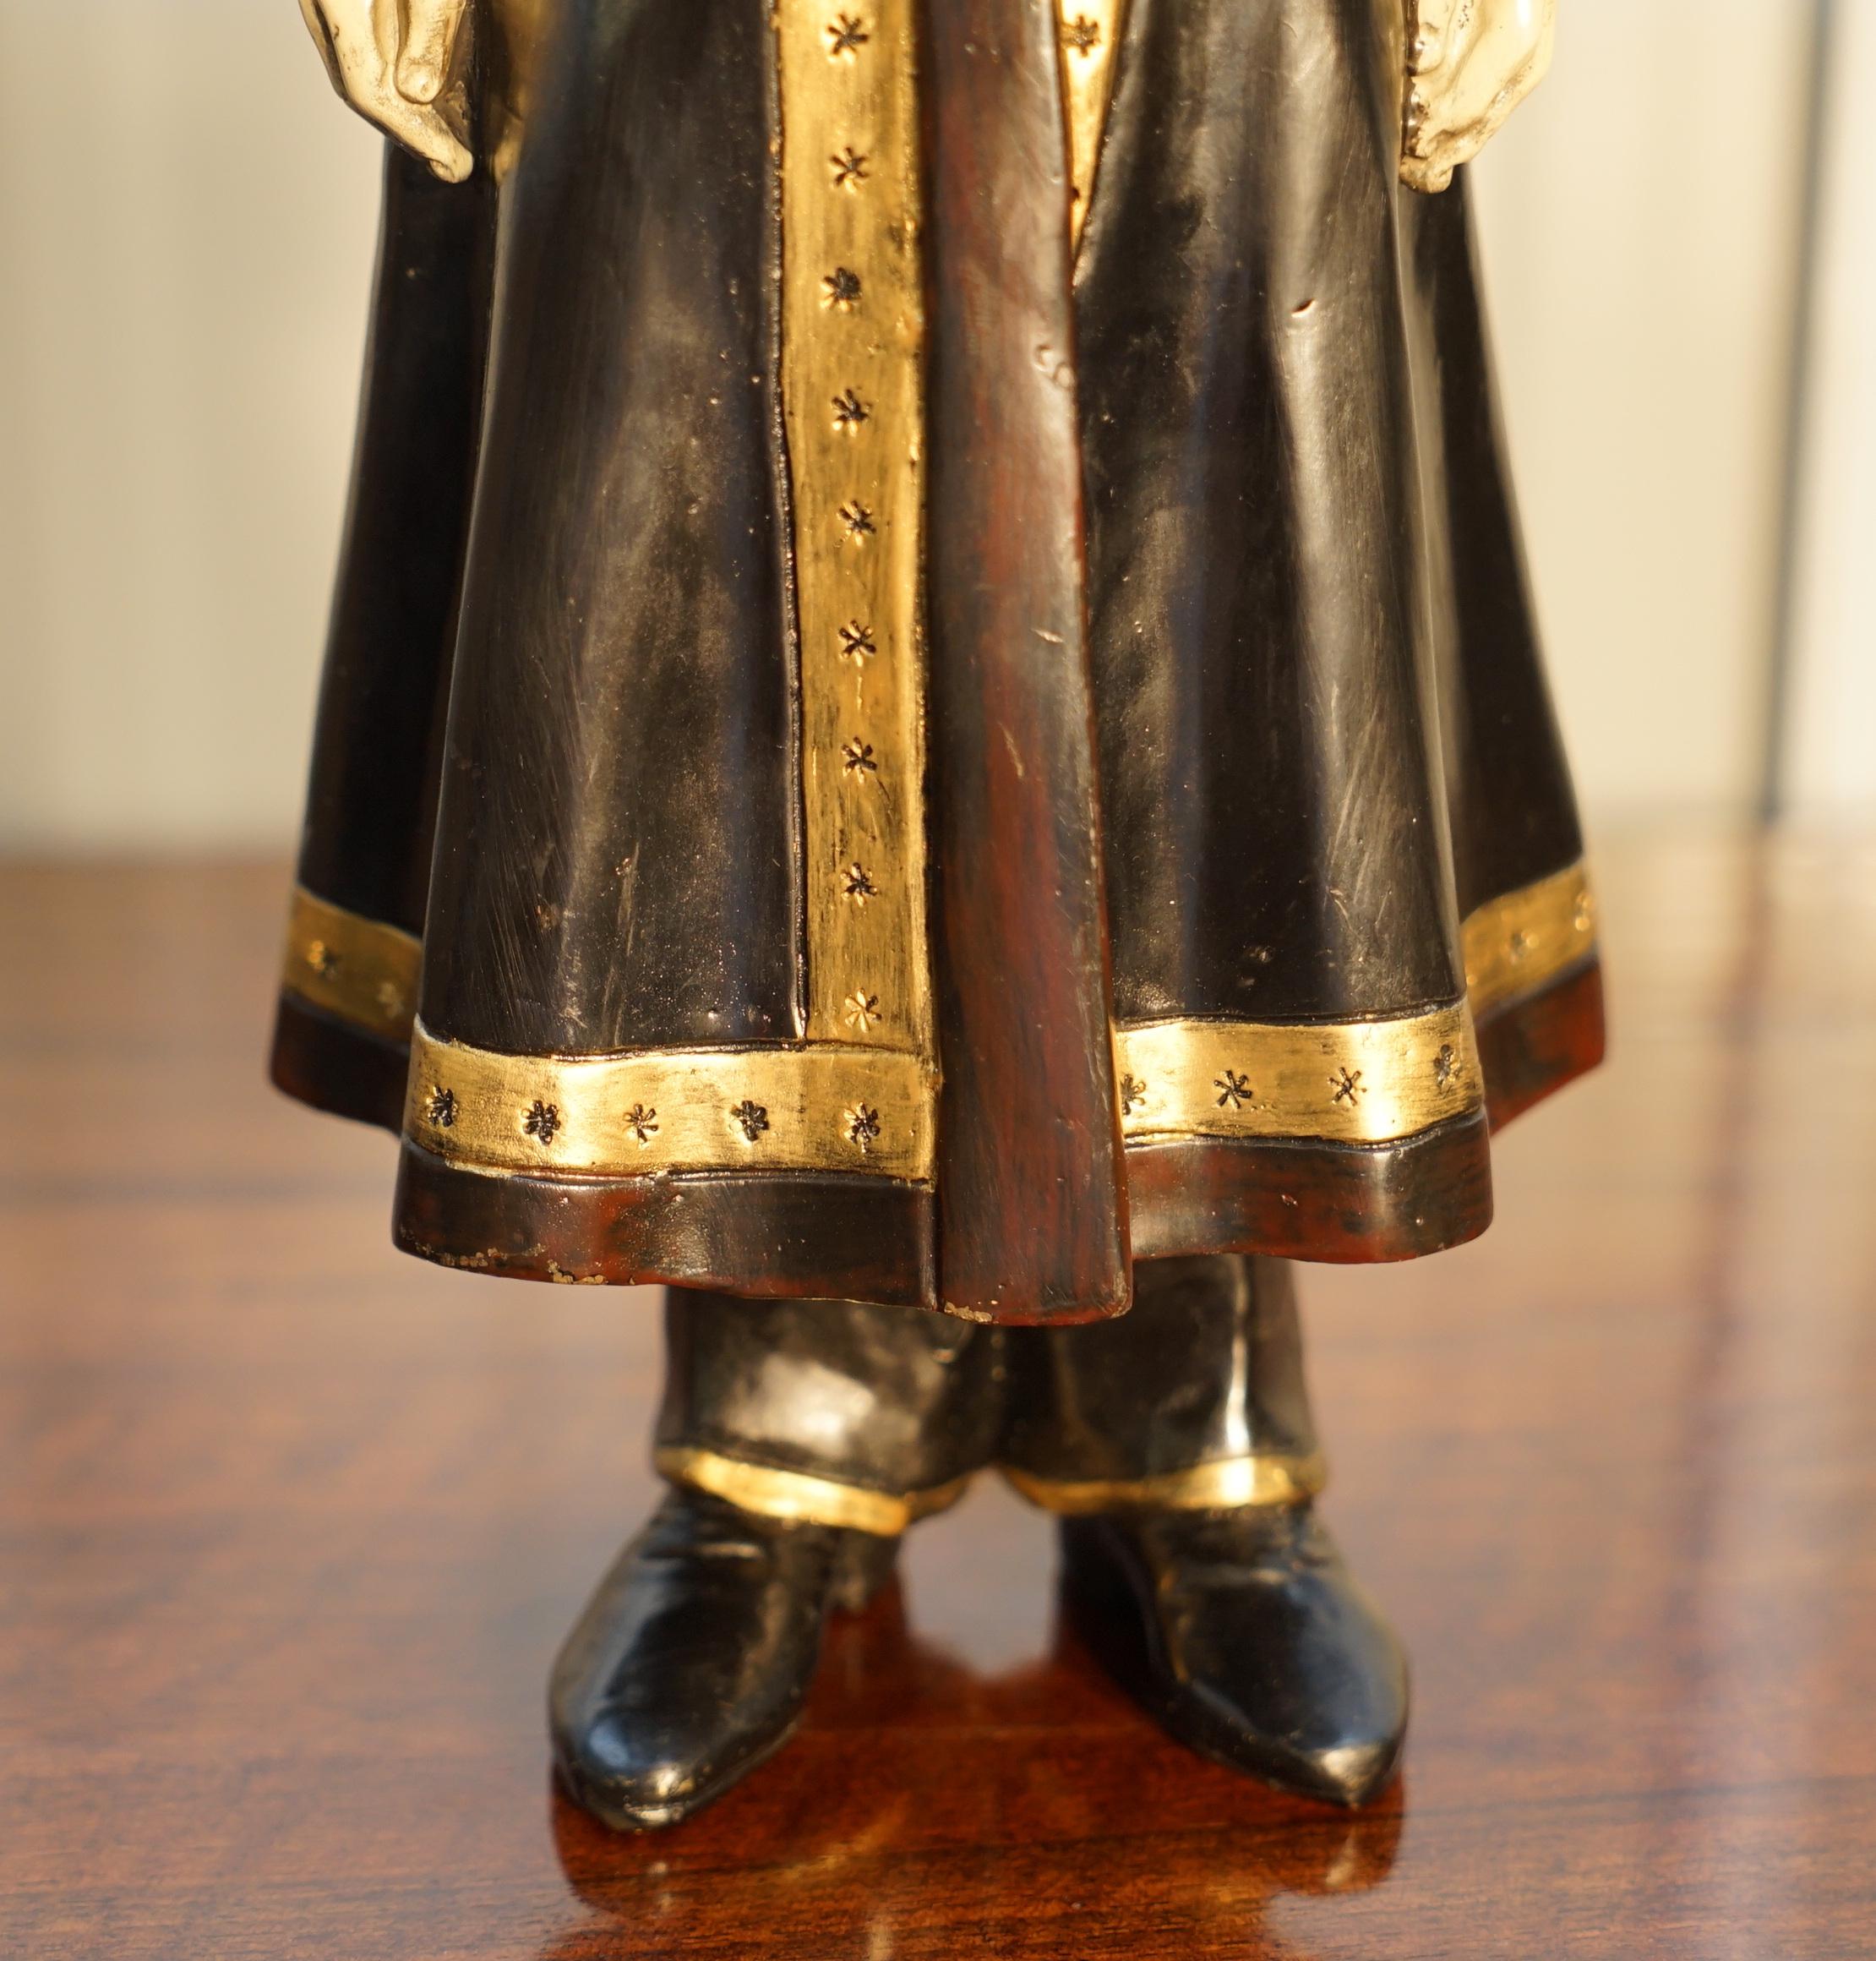 Pair of Rare Important Statues Signed Faberge 1912 Russian Kamer Kazak Bodyguard For Sale 8